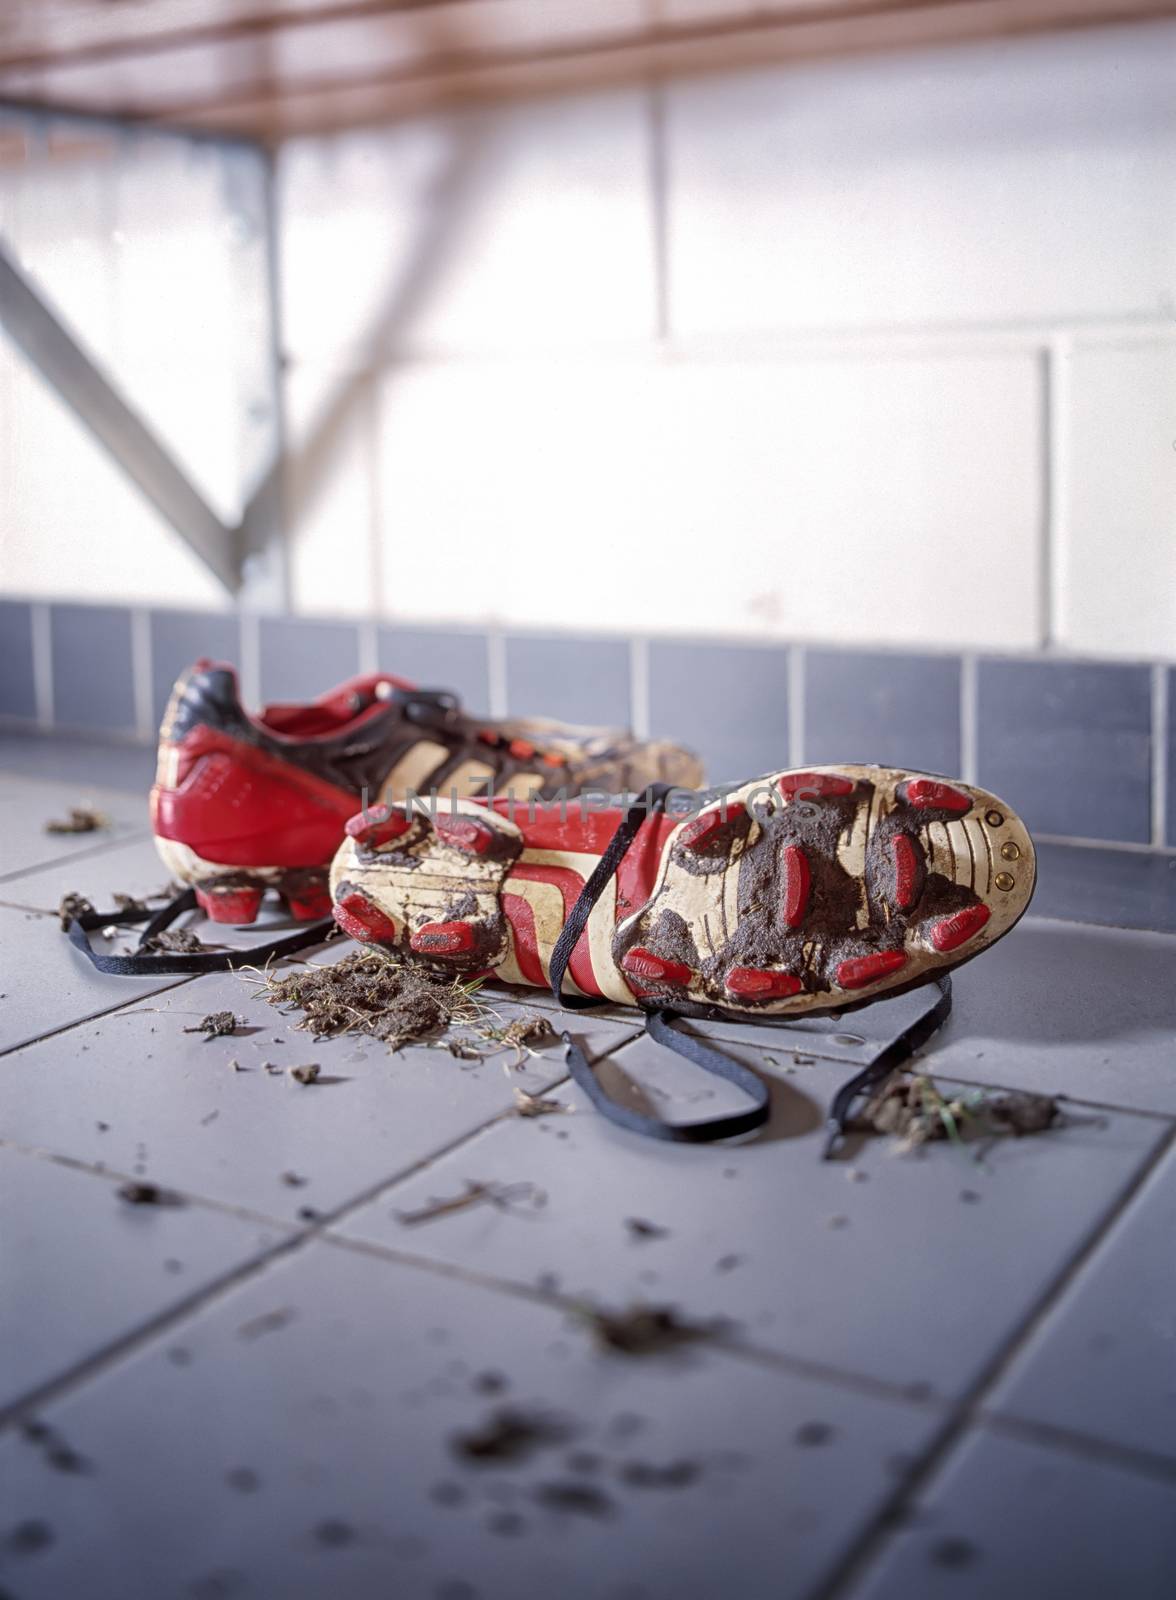 Pair of dirty football shoes by janssenkruseproductions